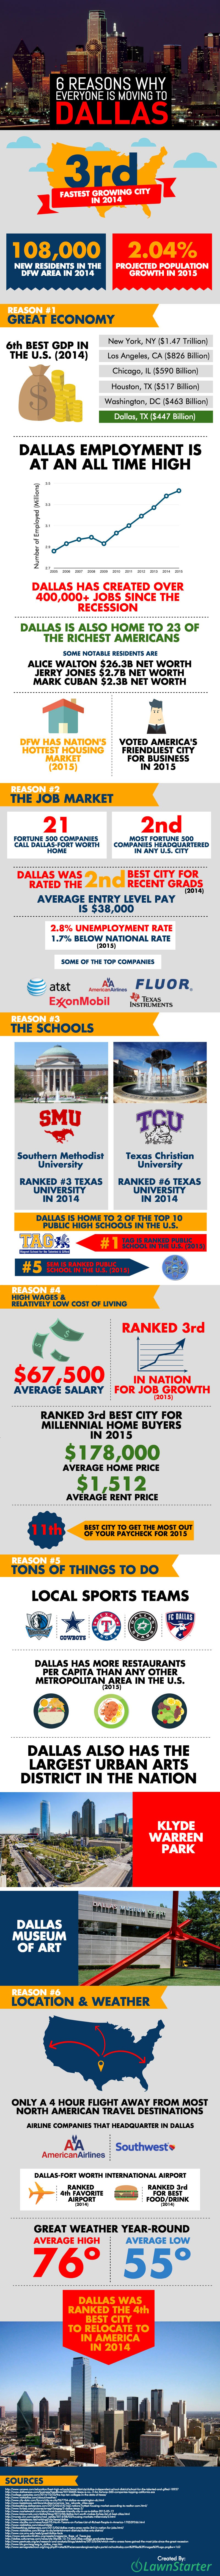 6 Reasons Why Everyone Is Moving To Dallas Texas by Lawnstarter